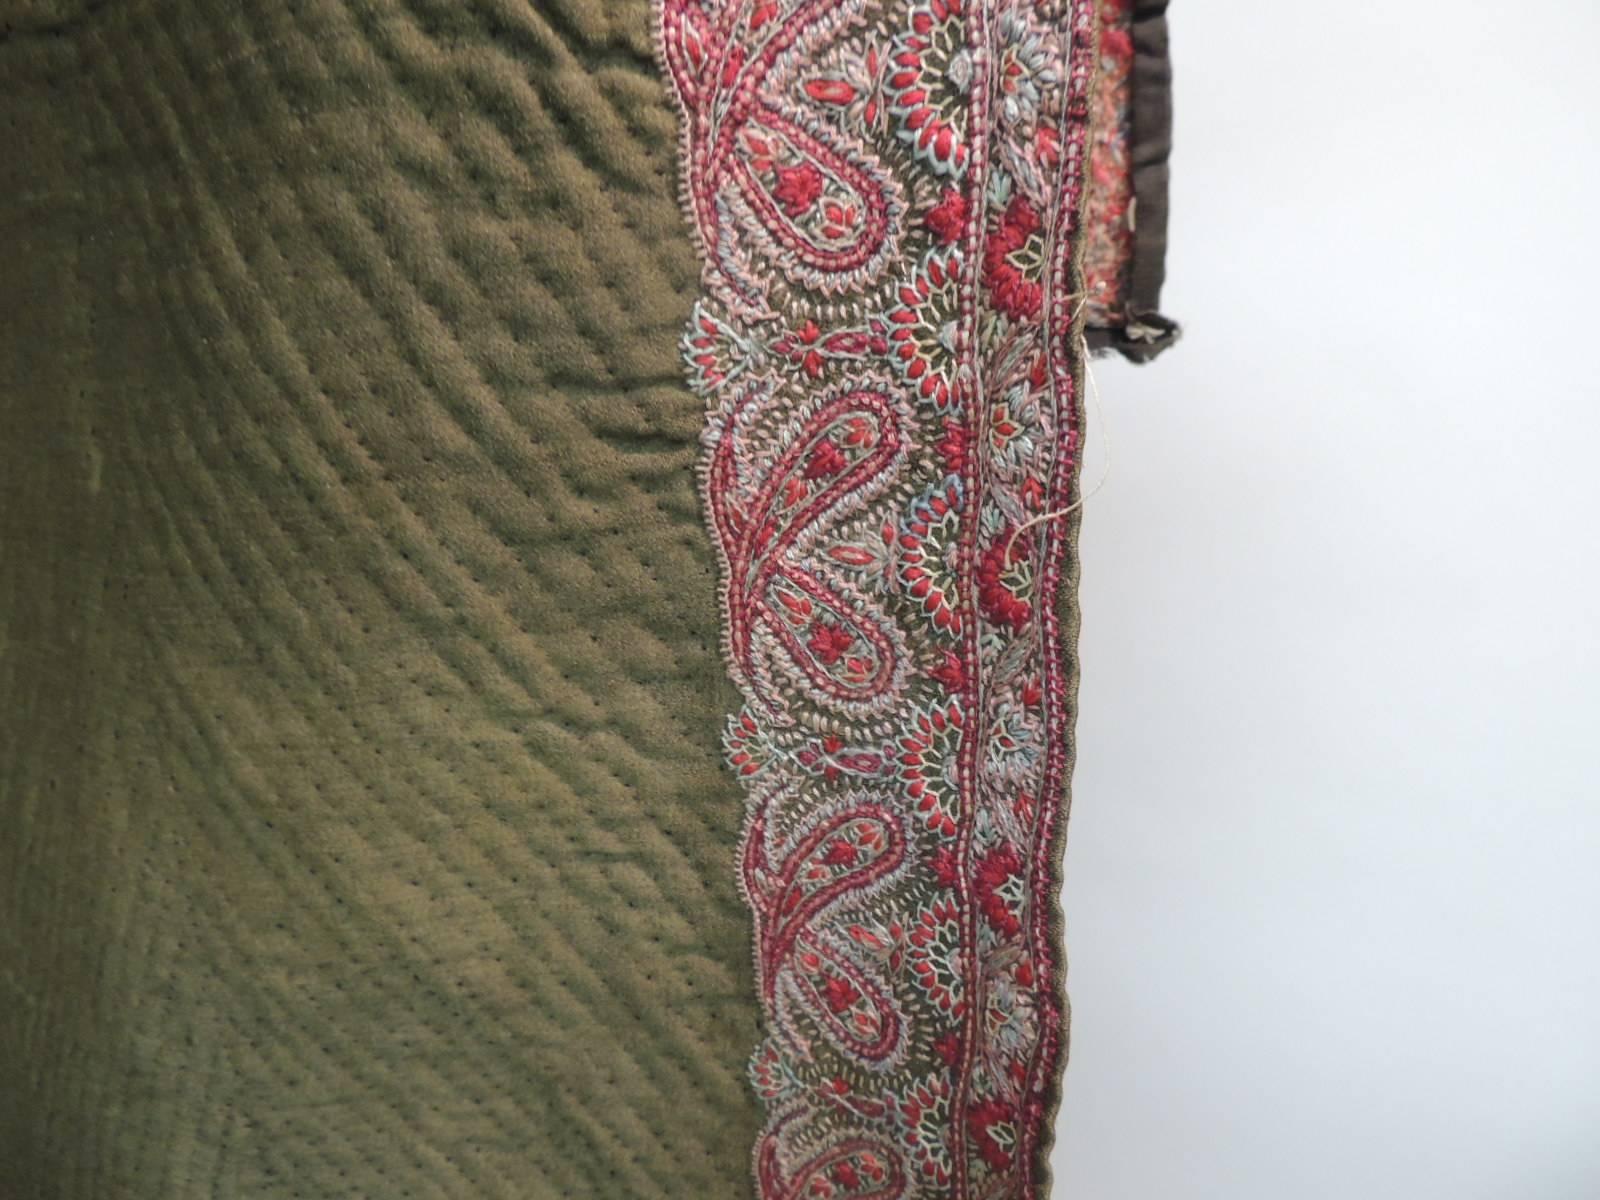 Hand-Crafted 18th Century Red and Green Indian Paisley Embroidery Cloth